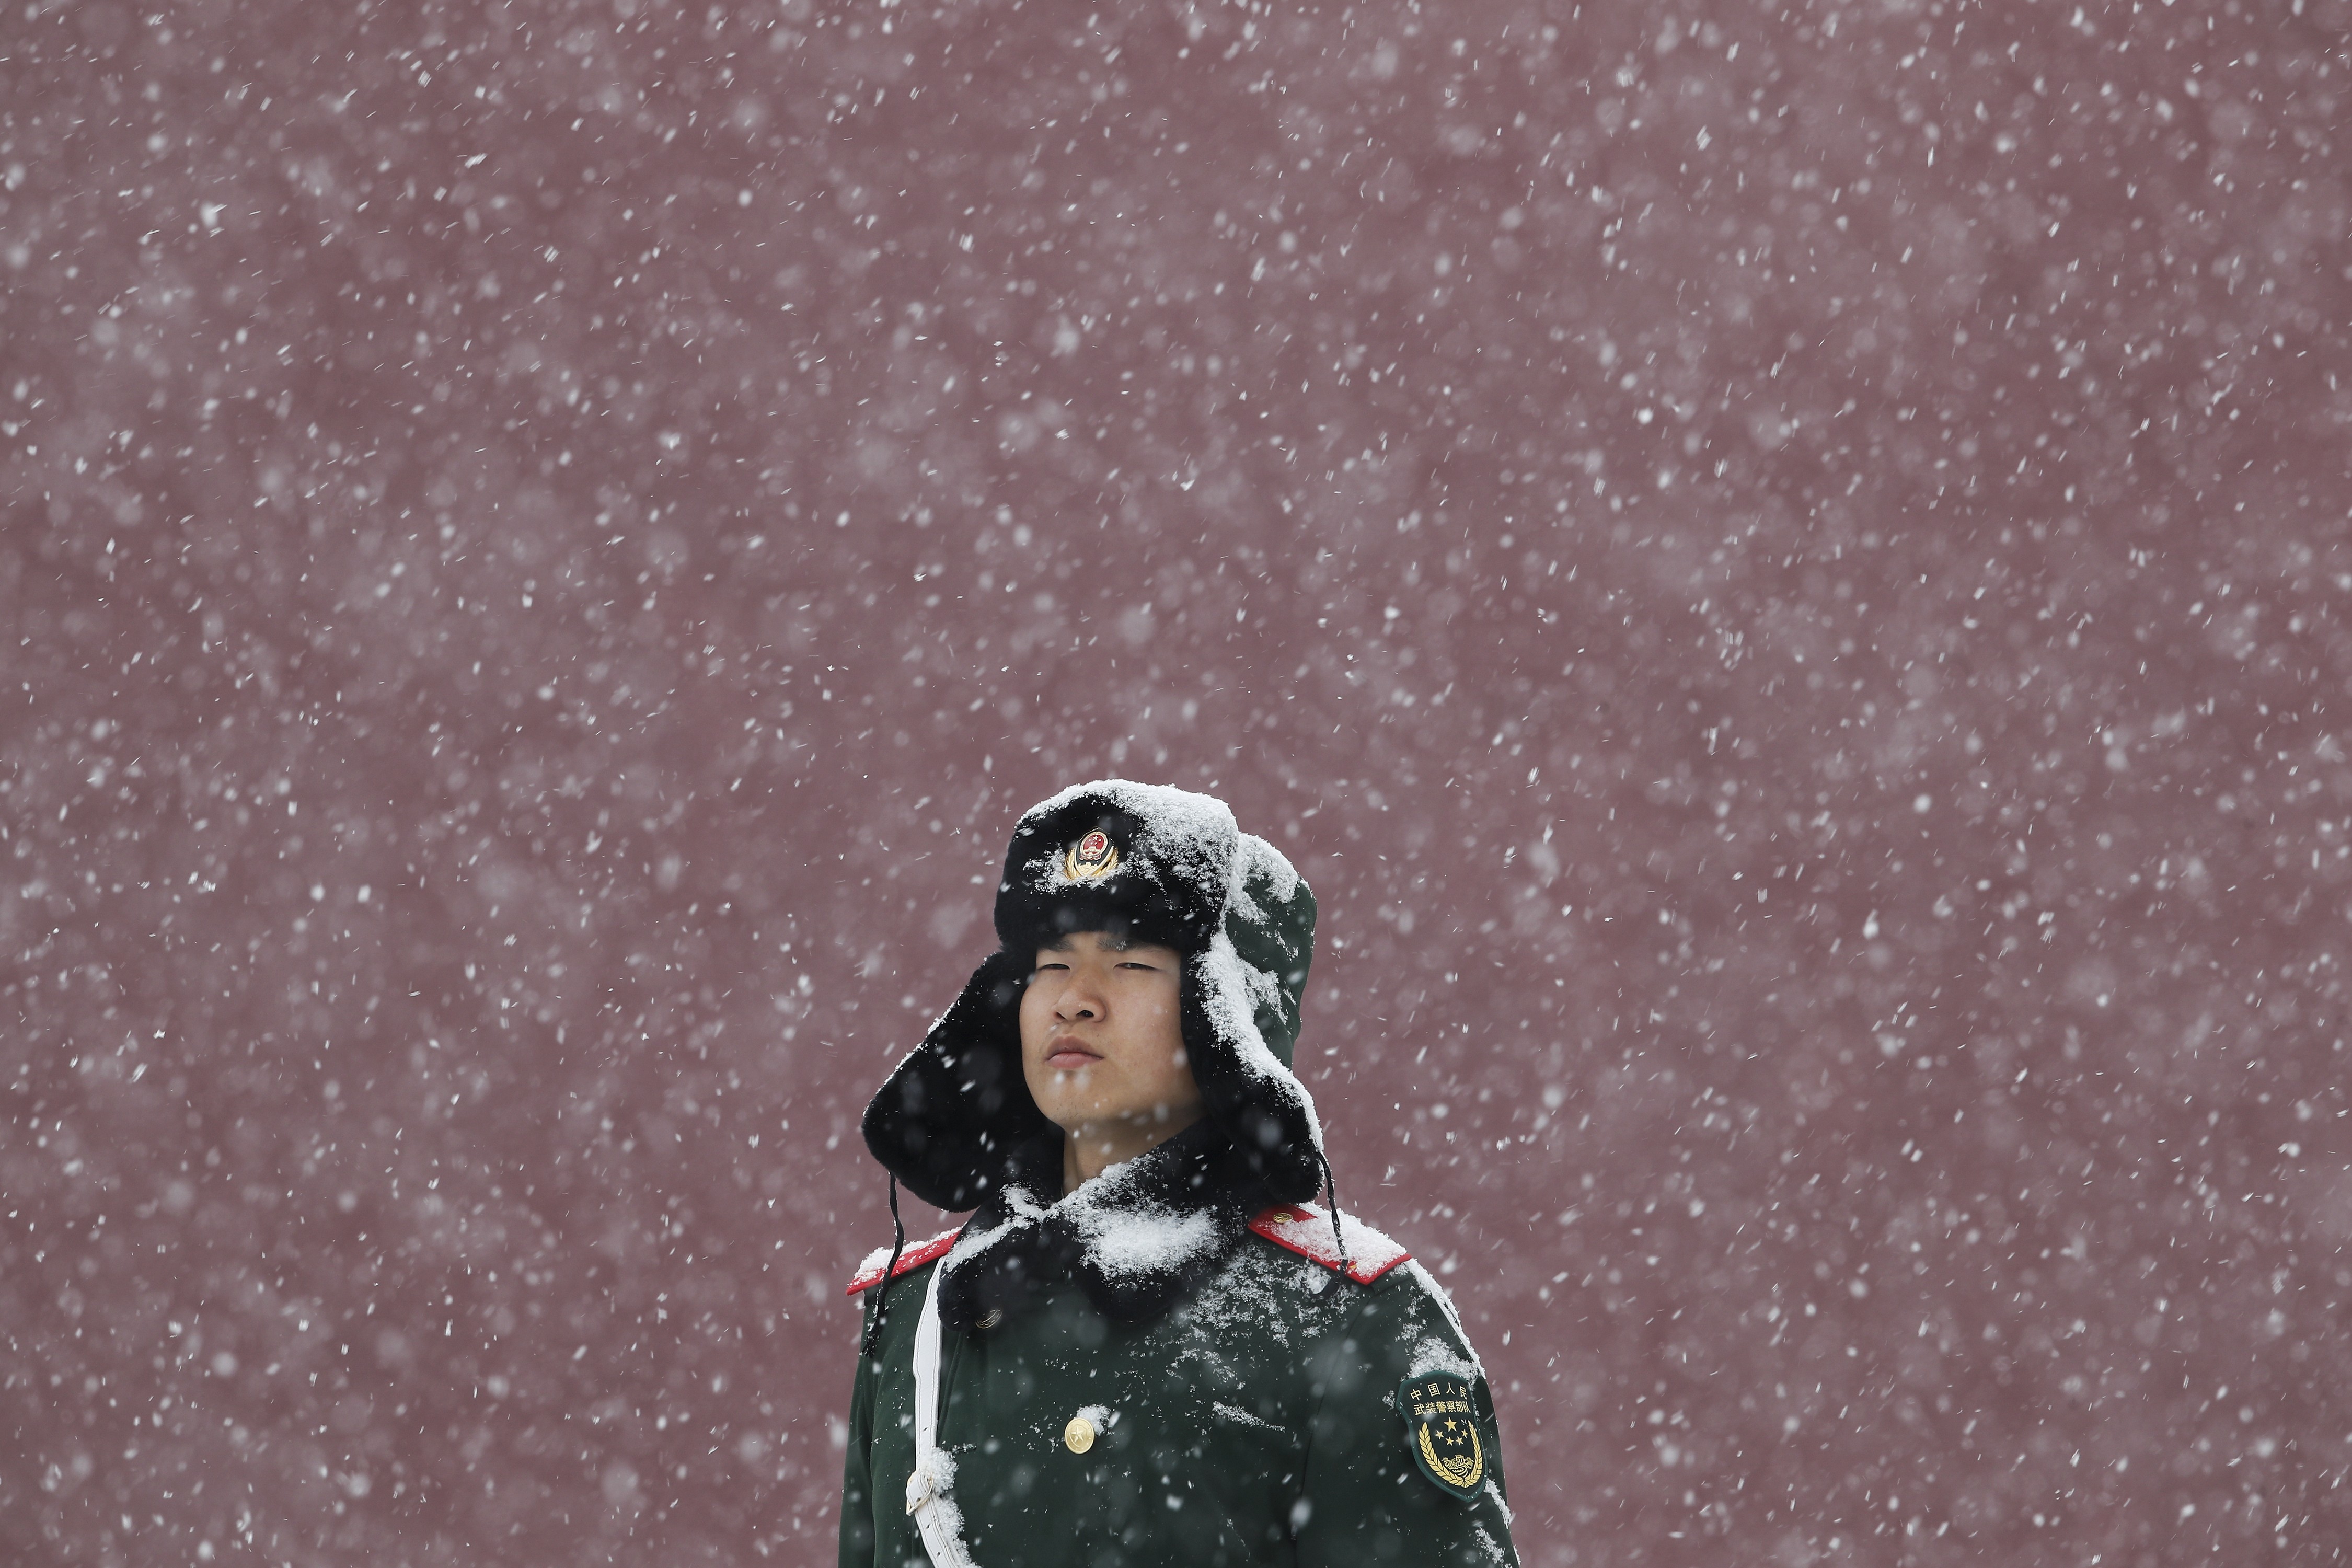 A paramilitary police officer stands guard outside Tiananmen as snow falls in Beijing on February 12. The Chinese civilisation has gone through many ups and downs in its history and learned many bitter lessons. Photo: AP